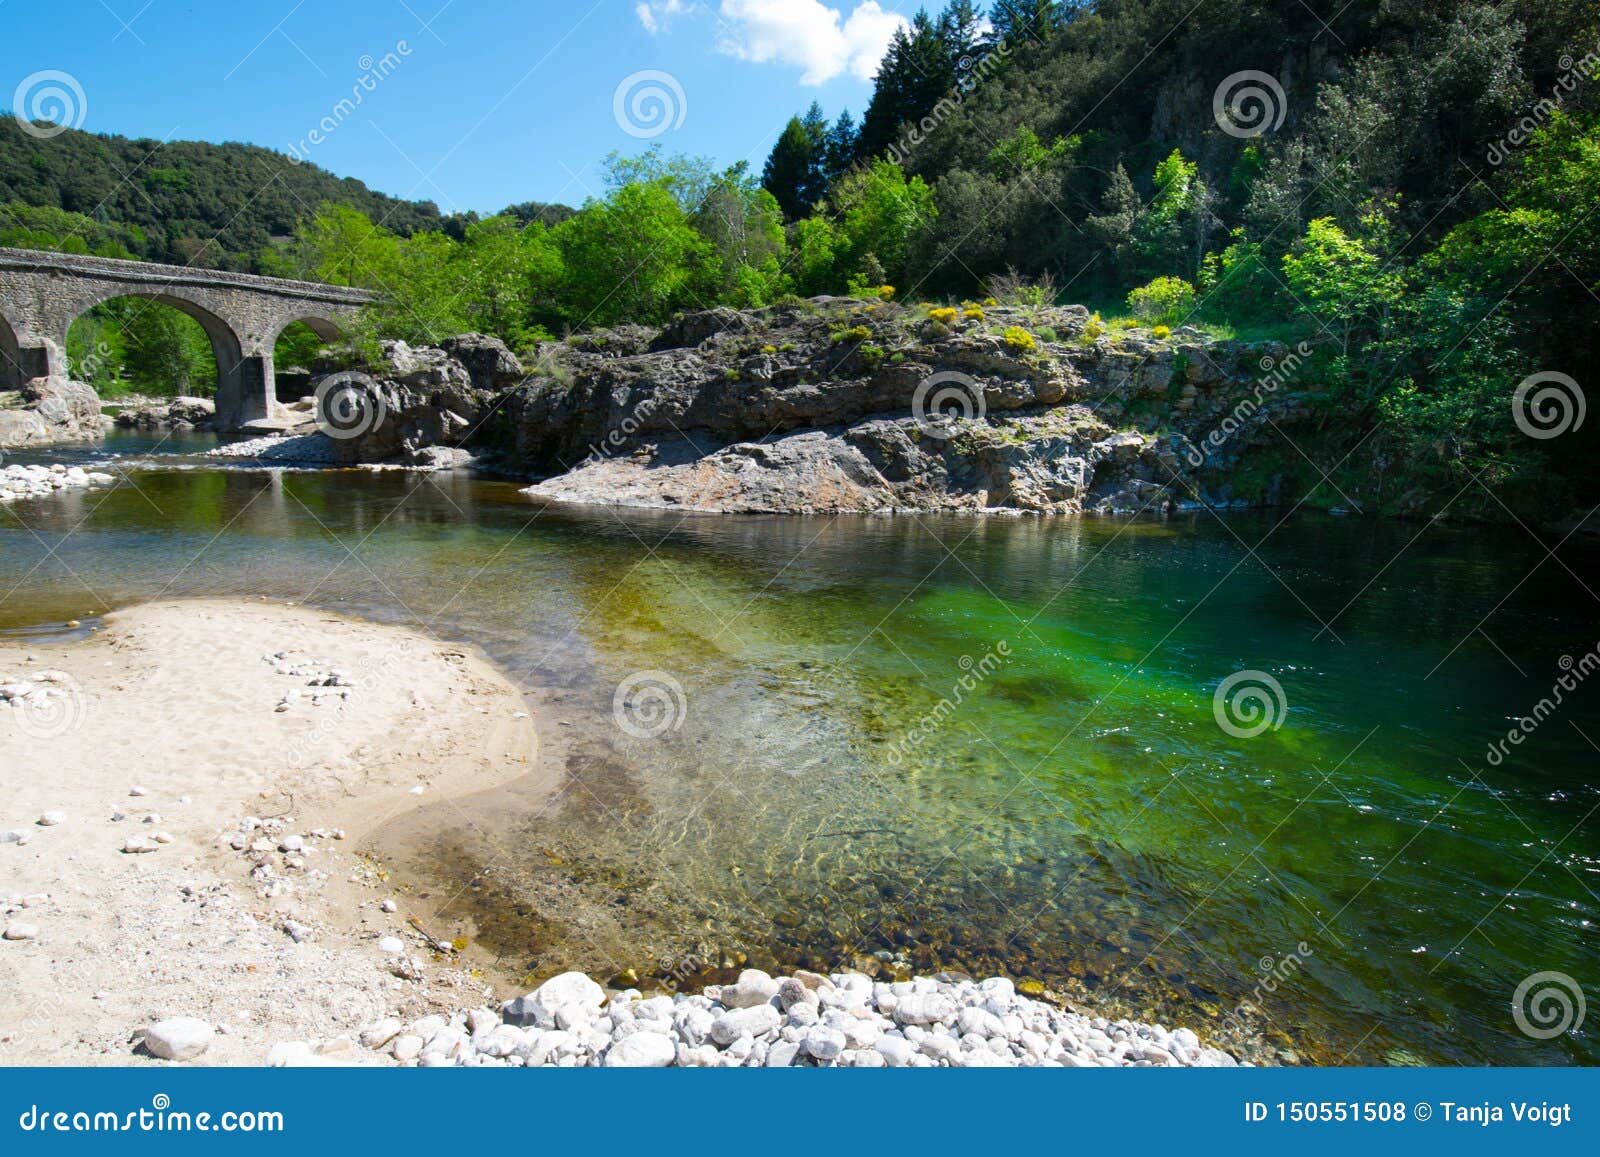 Ardeche River In France Editorial Stock Photo Image Of Ardeche 150551508